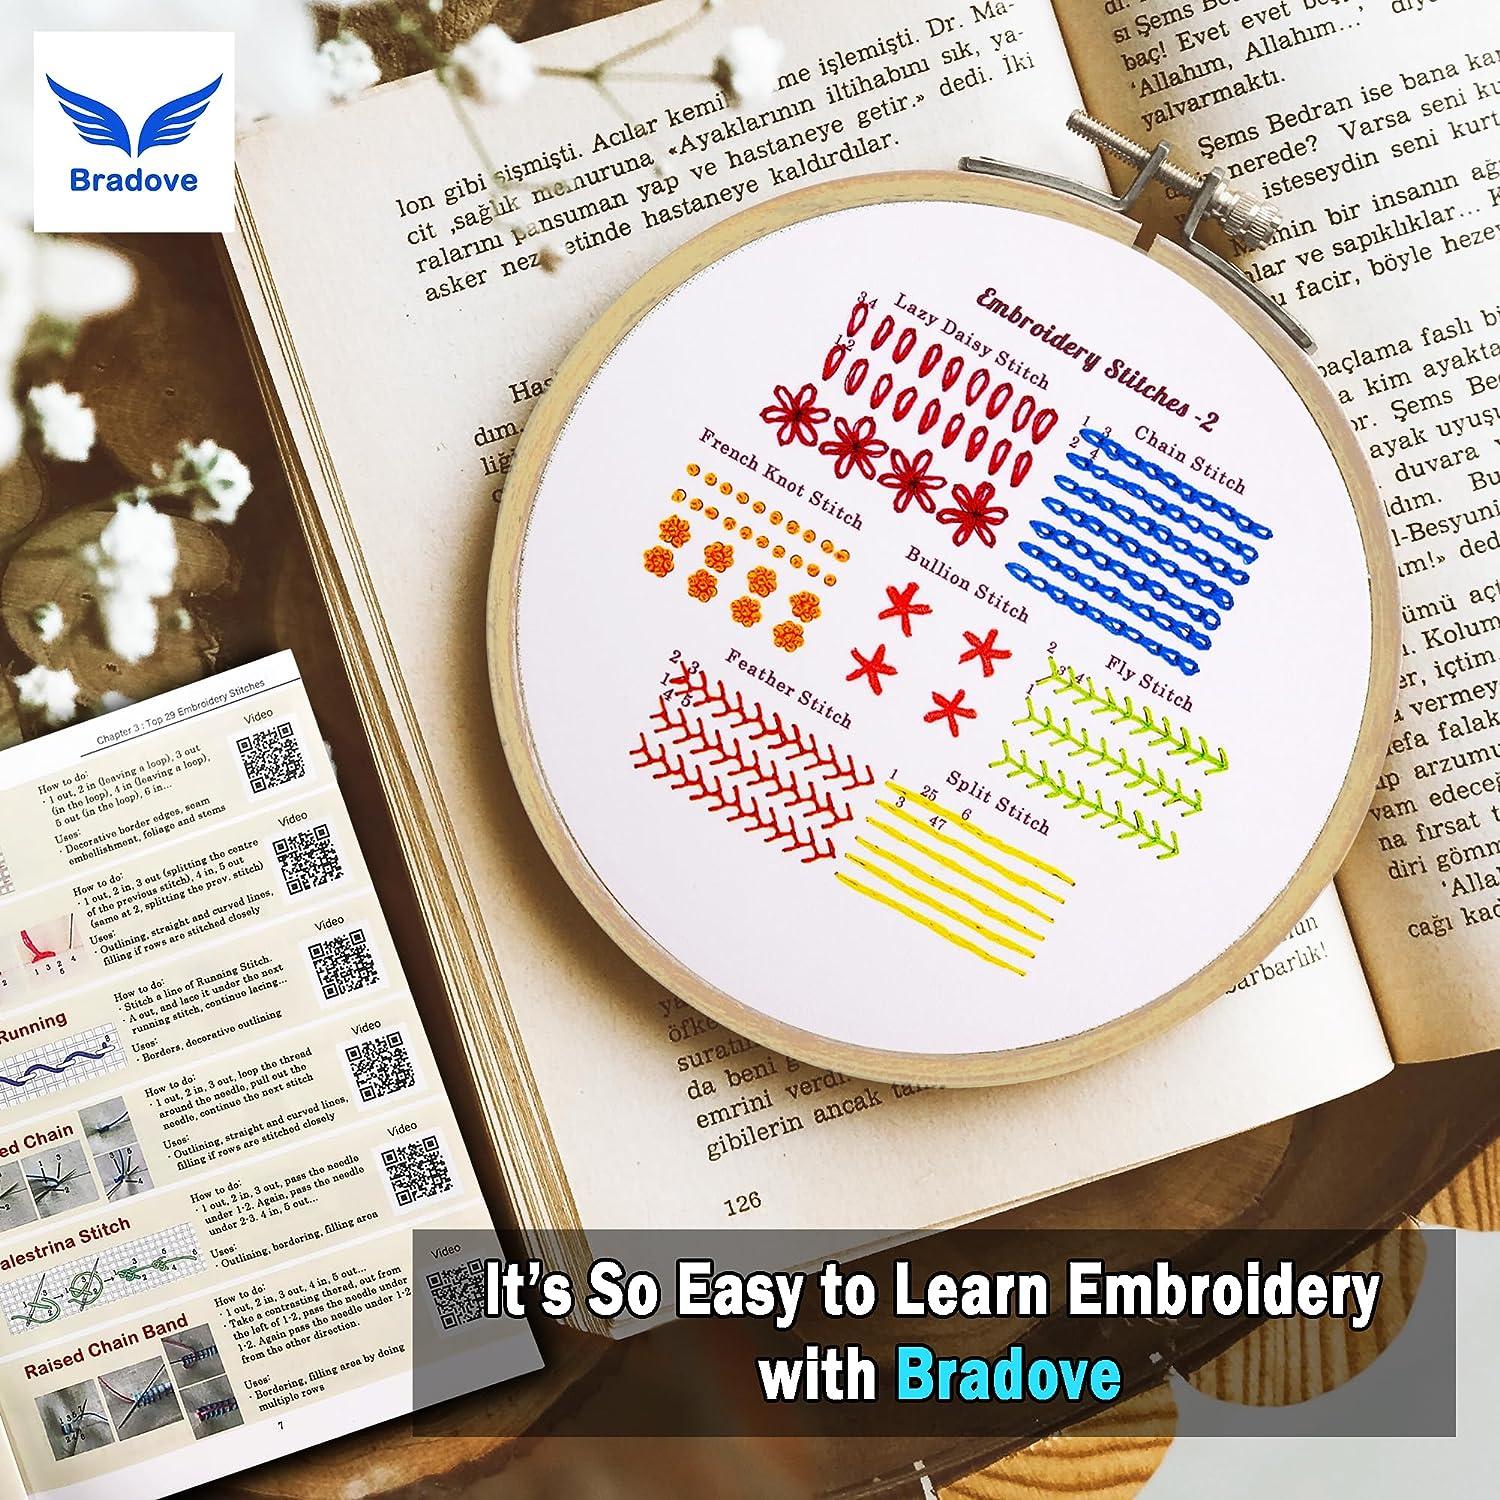  Bradove Learn Top 29 Stitches and 3 Cute Embroidery Patterns 3  Sets Beginner Embroidery Kit for Adults and Kids, Embroidery Kit for  Beginners Adults Kids, Hand Embroidery Kit, Craft Kits for Adults